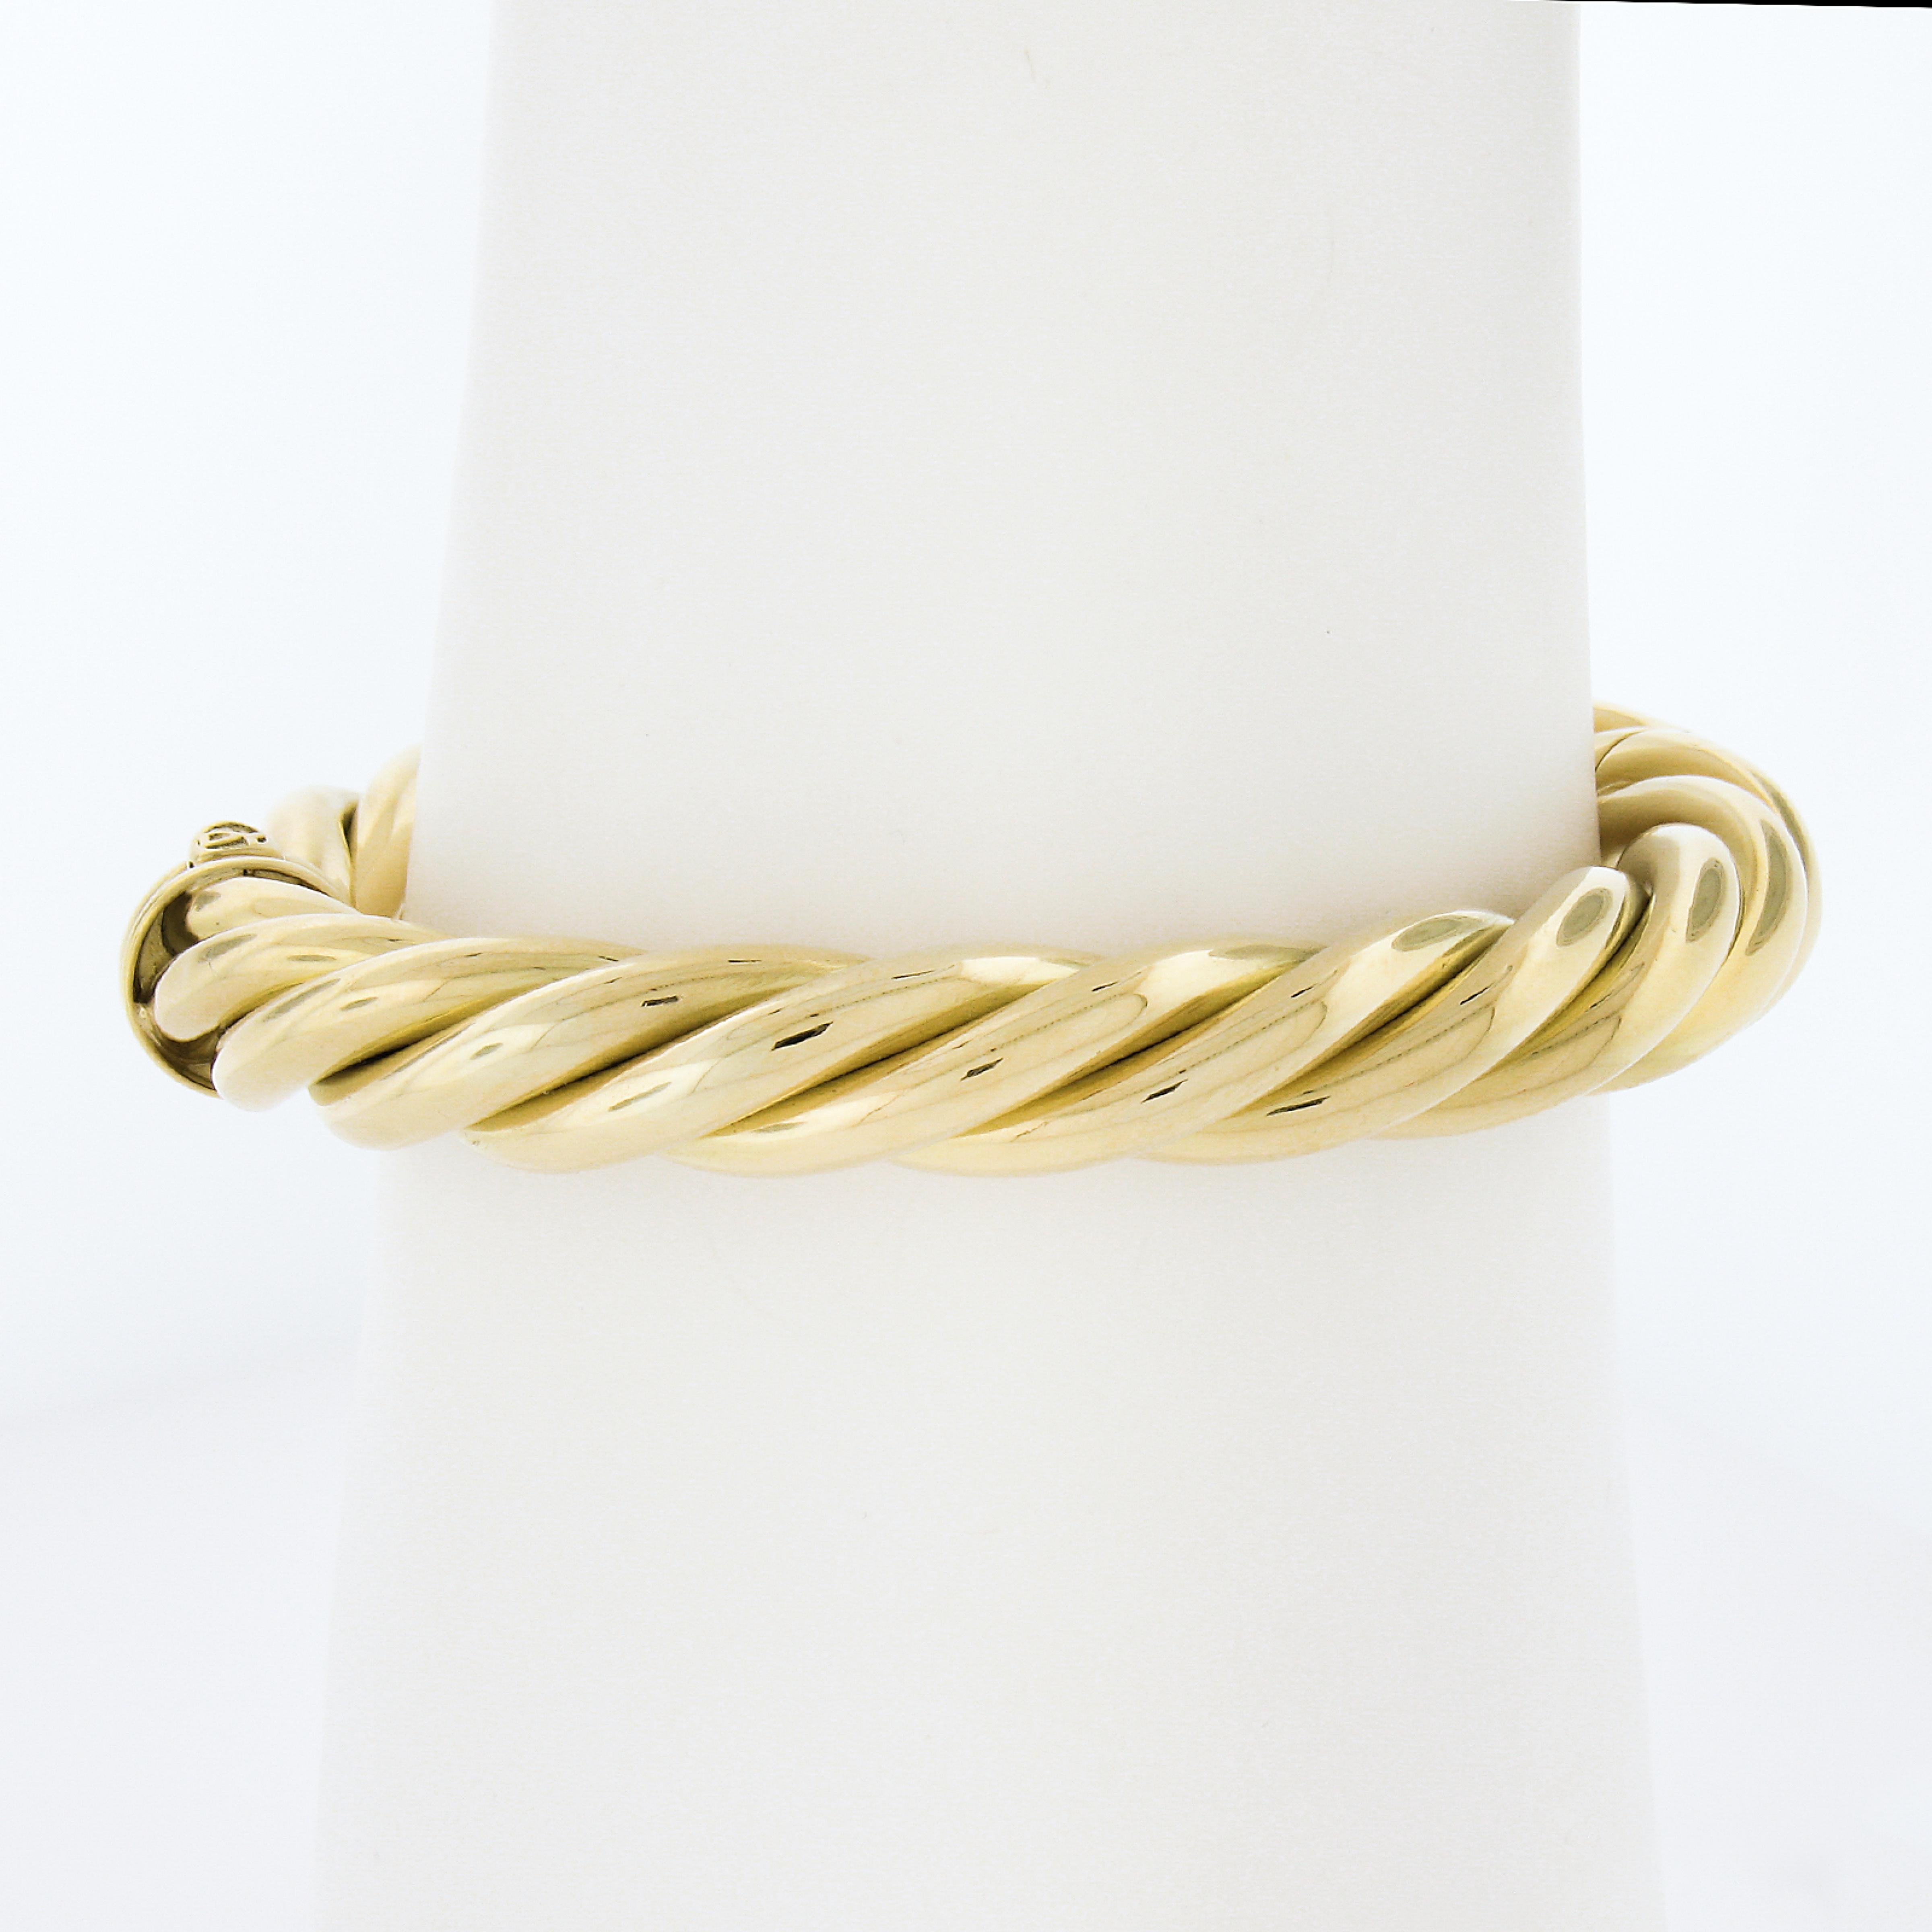 Material: Solid 18K Yellow Gold
Weight: 38.43 Grams
Type: Twisted Hinged Open Bangle Bracelet
Length: Will Comfortably fit up to a 6.75 inch wrist (Fitted on a wrist)
Clasp: Push Clasp
Width: 9.5mm (0.37